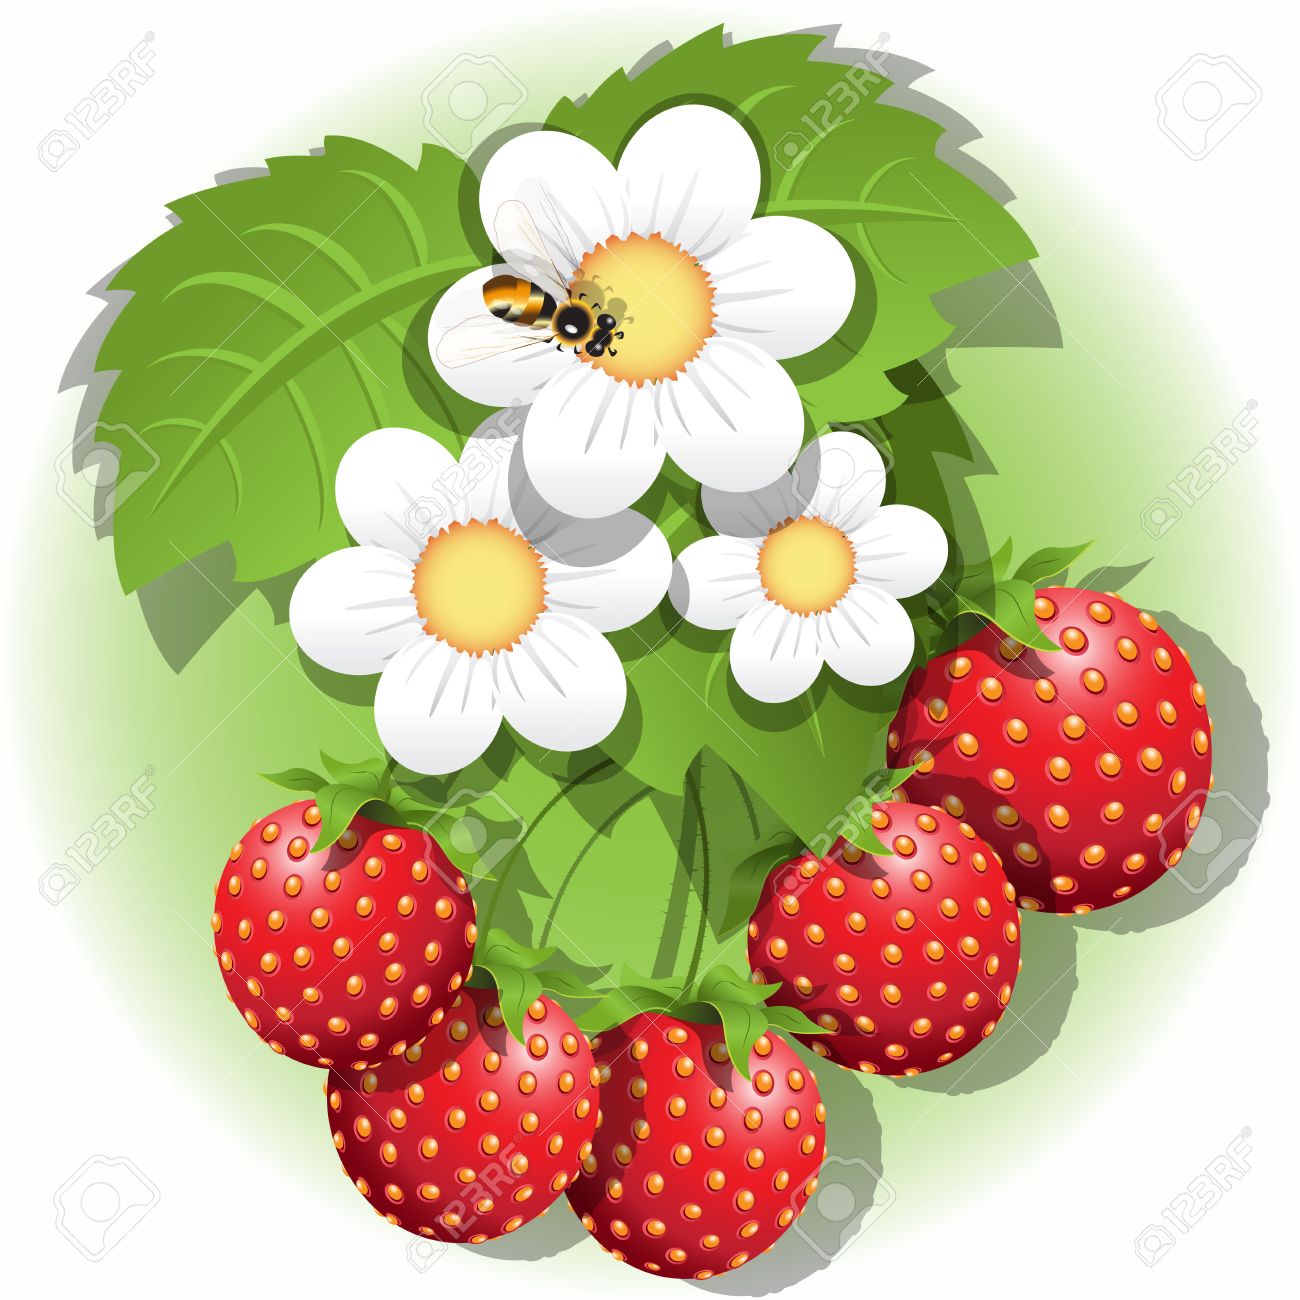 Garden strawberry clipart 20 free Cliparts | Download images on